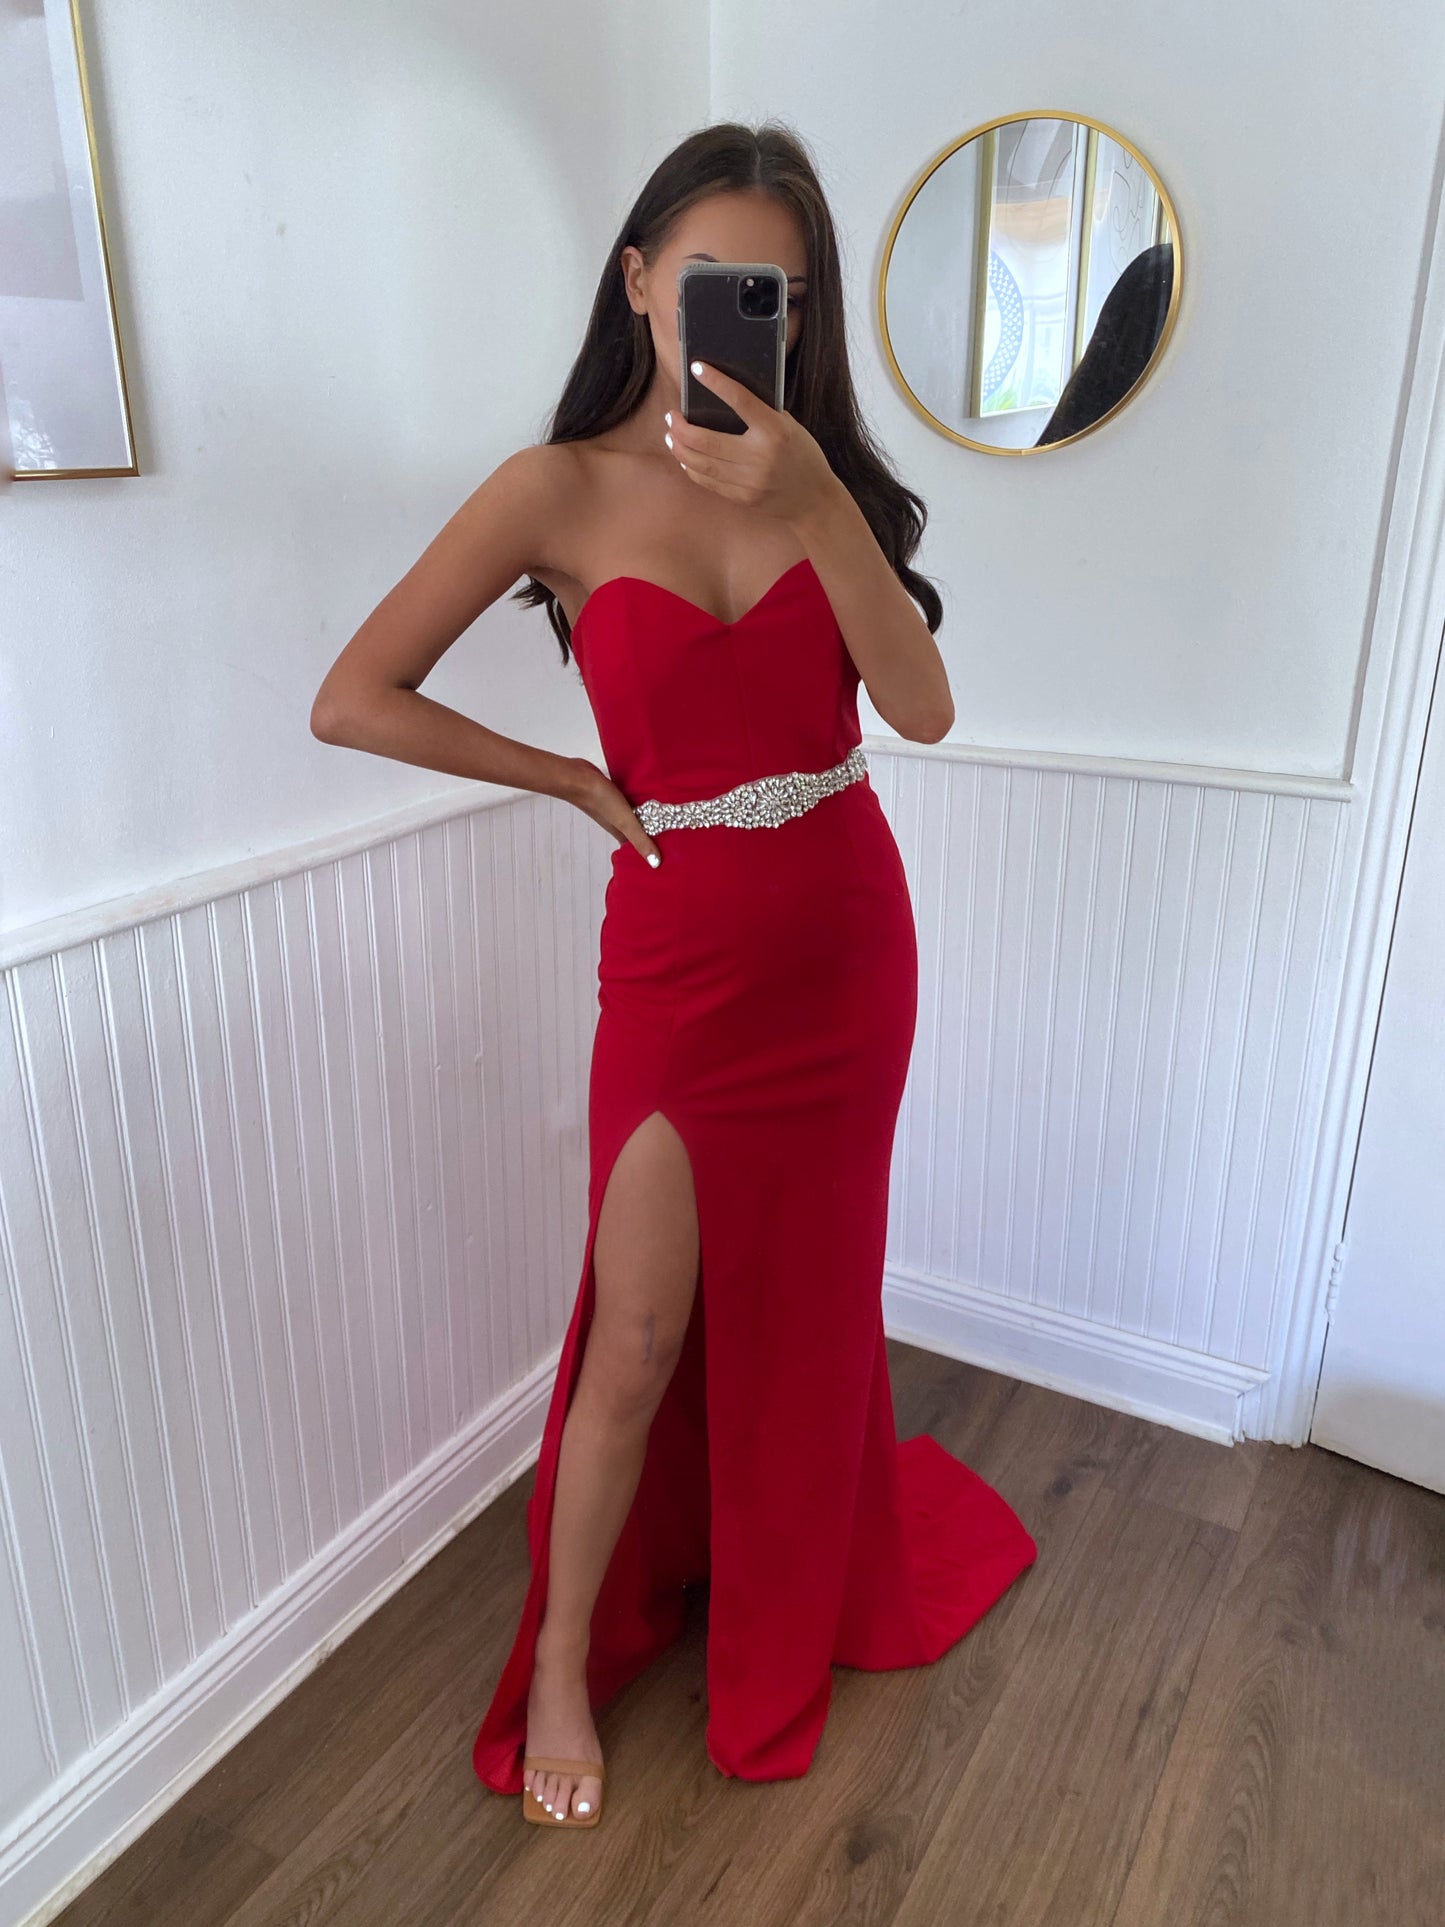 SWEETHHEART FITTED GOWN RED debs dress dublin